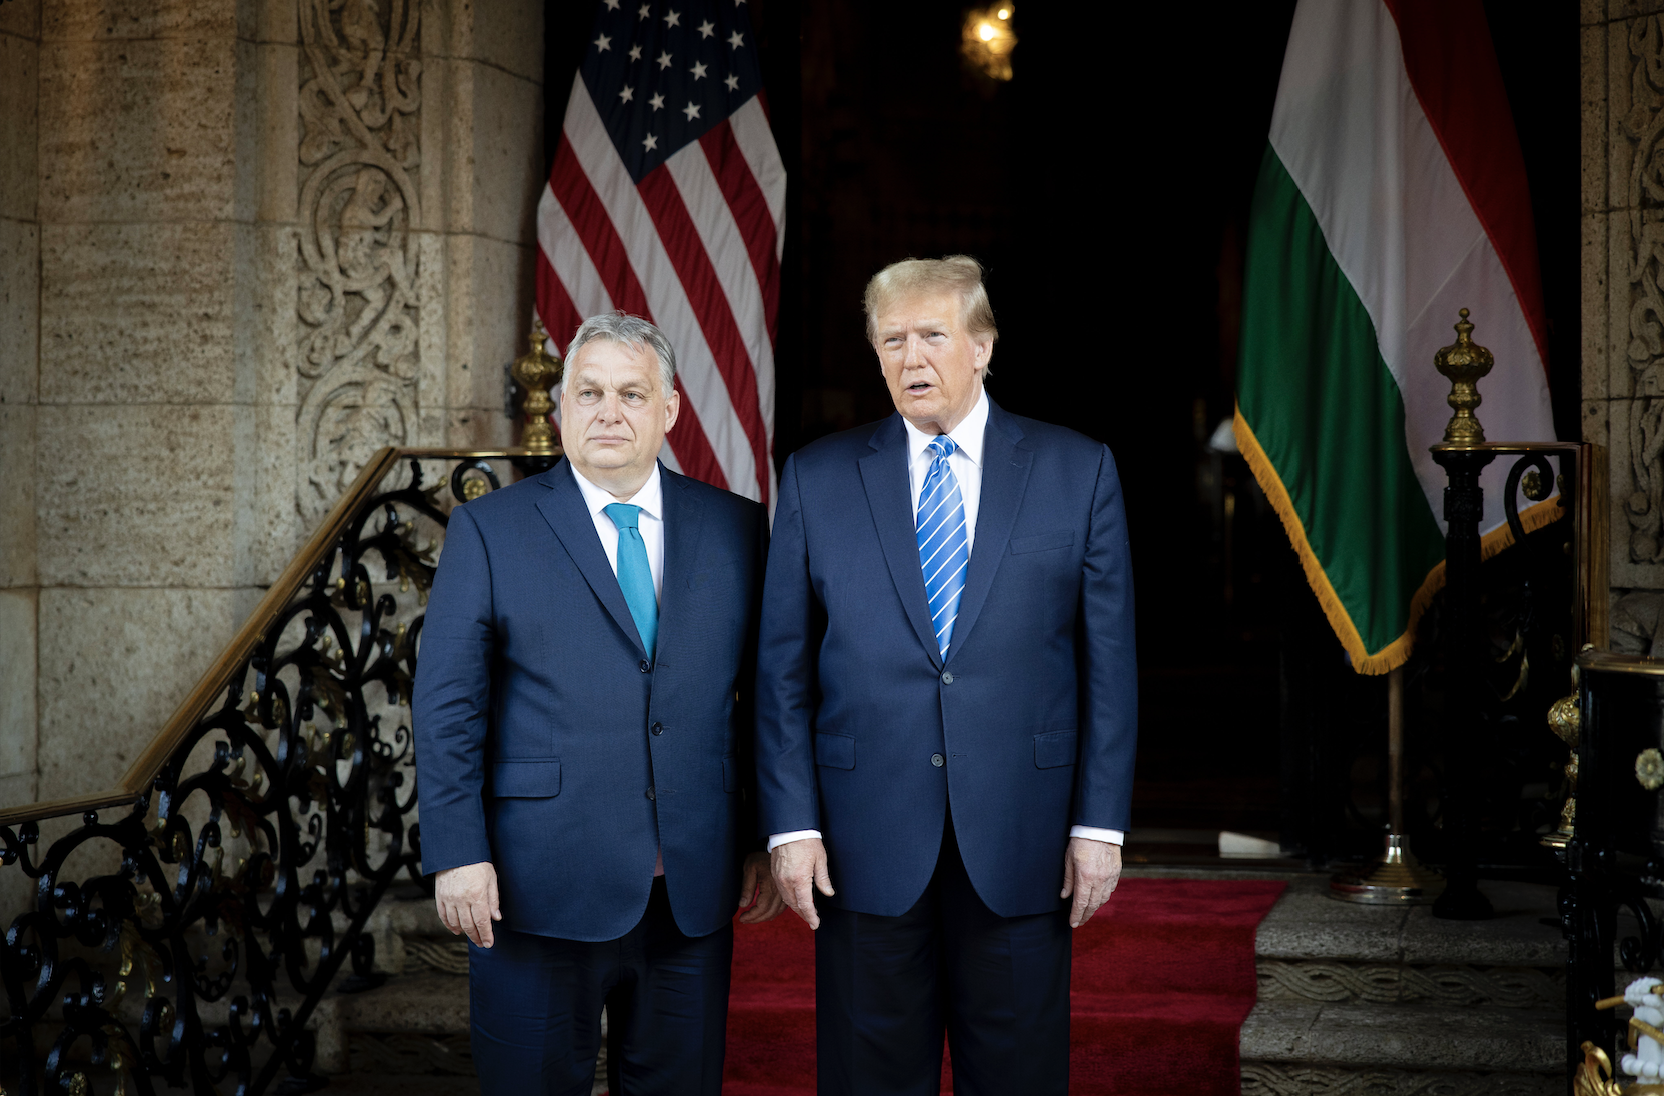 Orbán Praises Trump as 'President of Peace' After Meeting